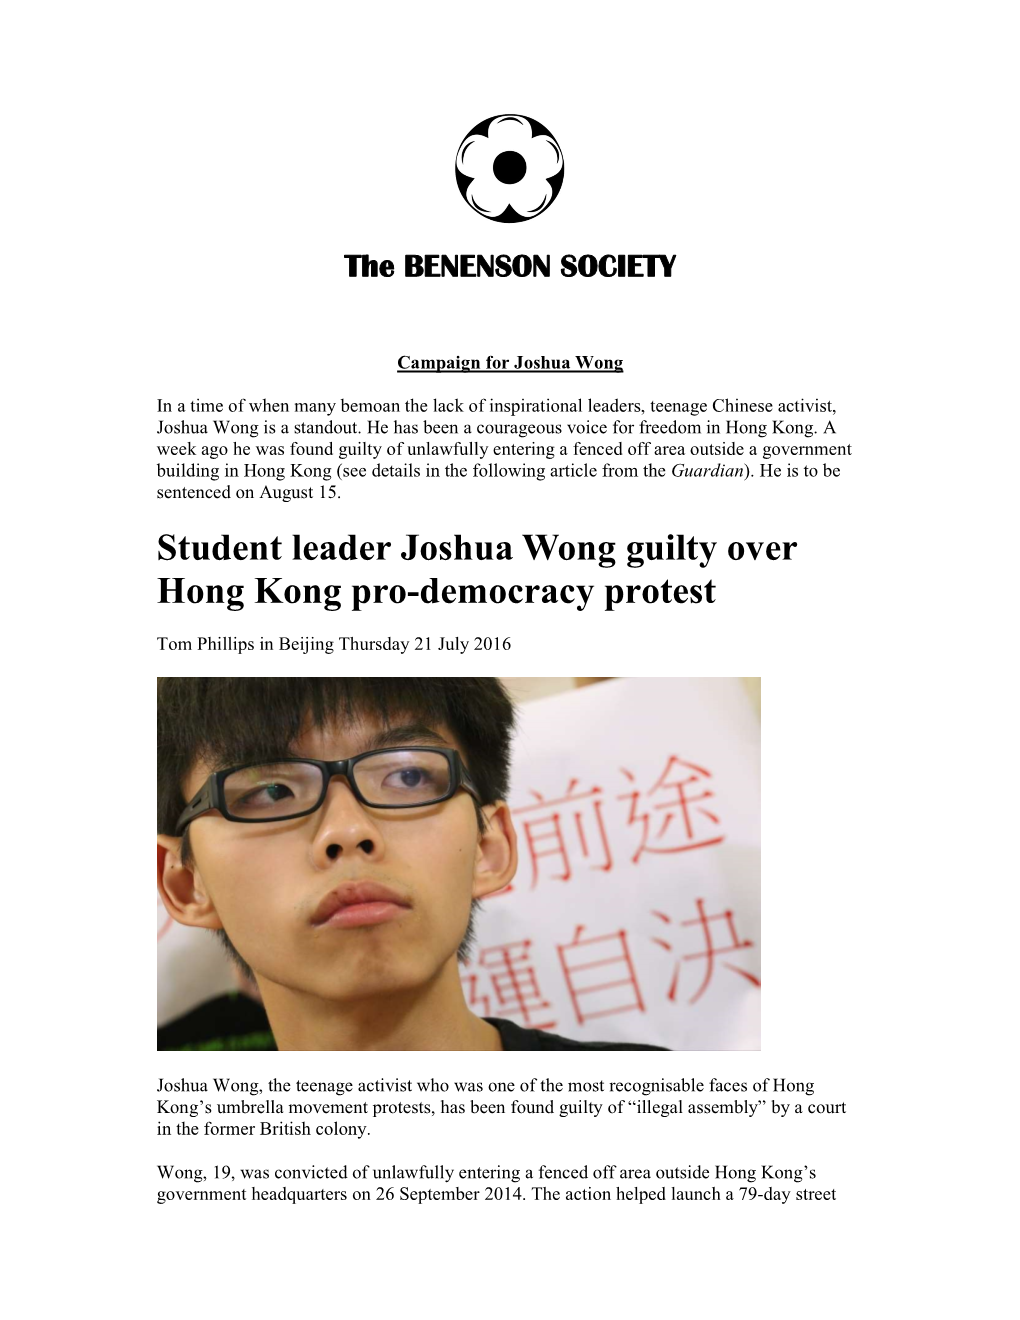 Student Leader Joshua Wong Guilty Over Hong Kong Pro-Democracy Protest Tom Phillips in Beijing Thursday 21 July 2016